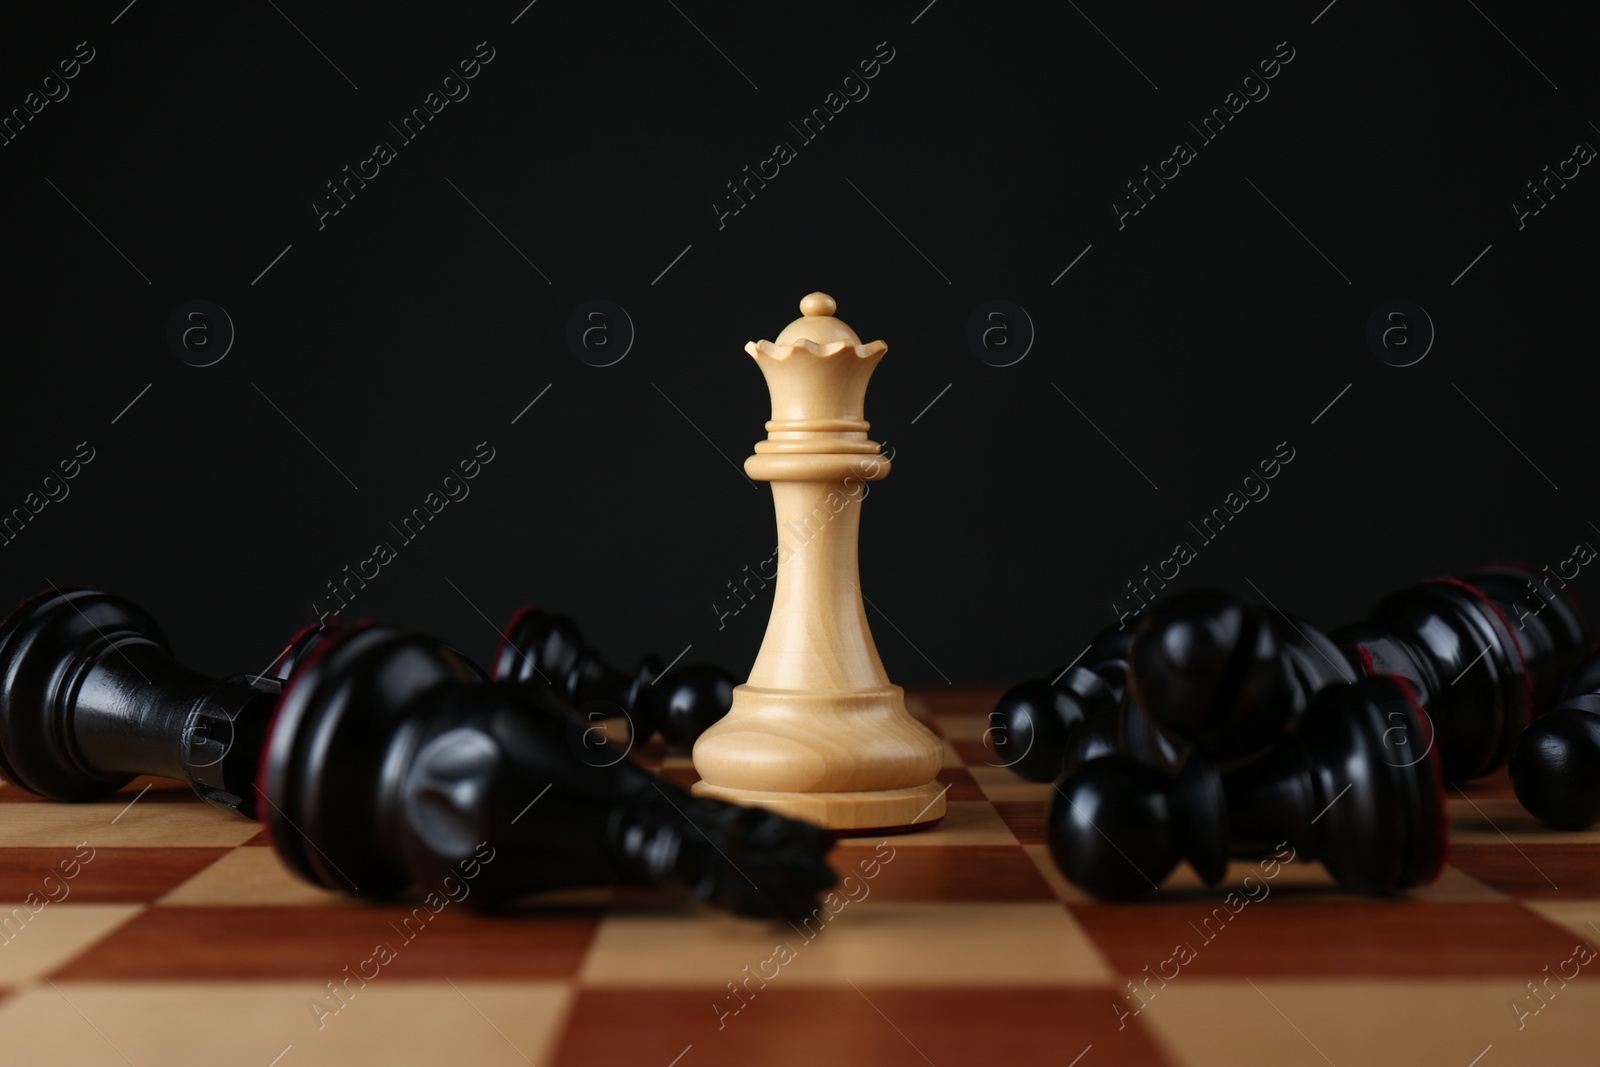 Photo of White queen among fallen black chess pieces on wooden board against dark background